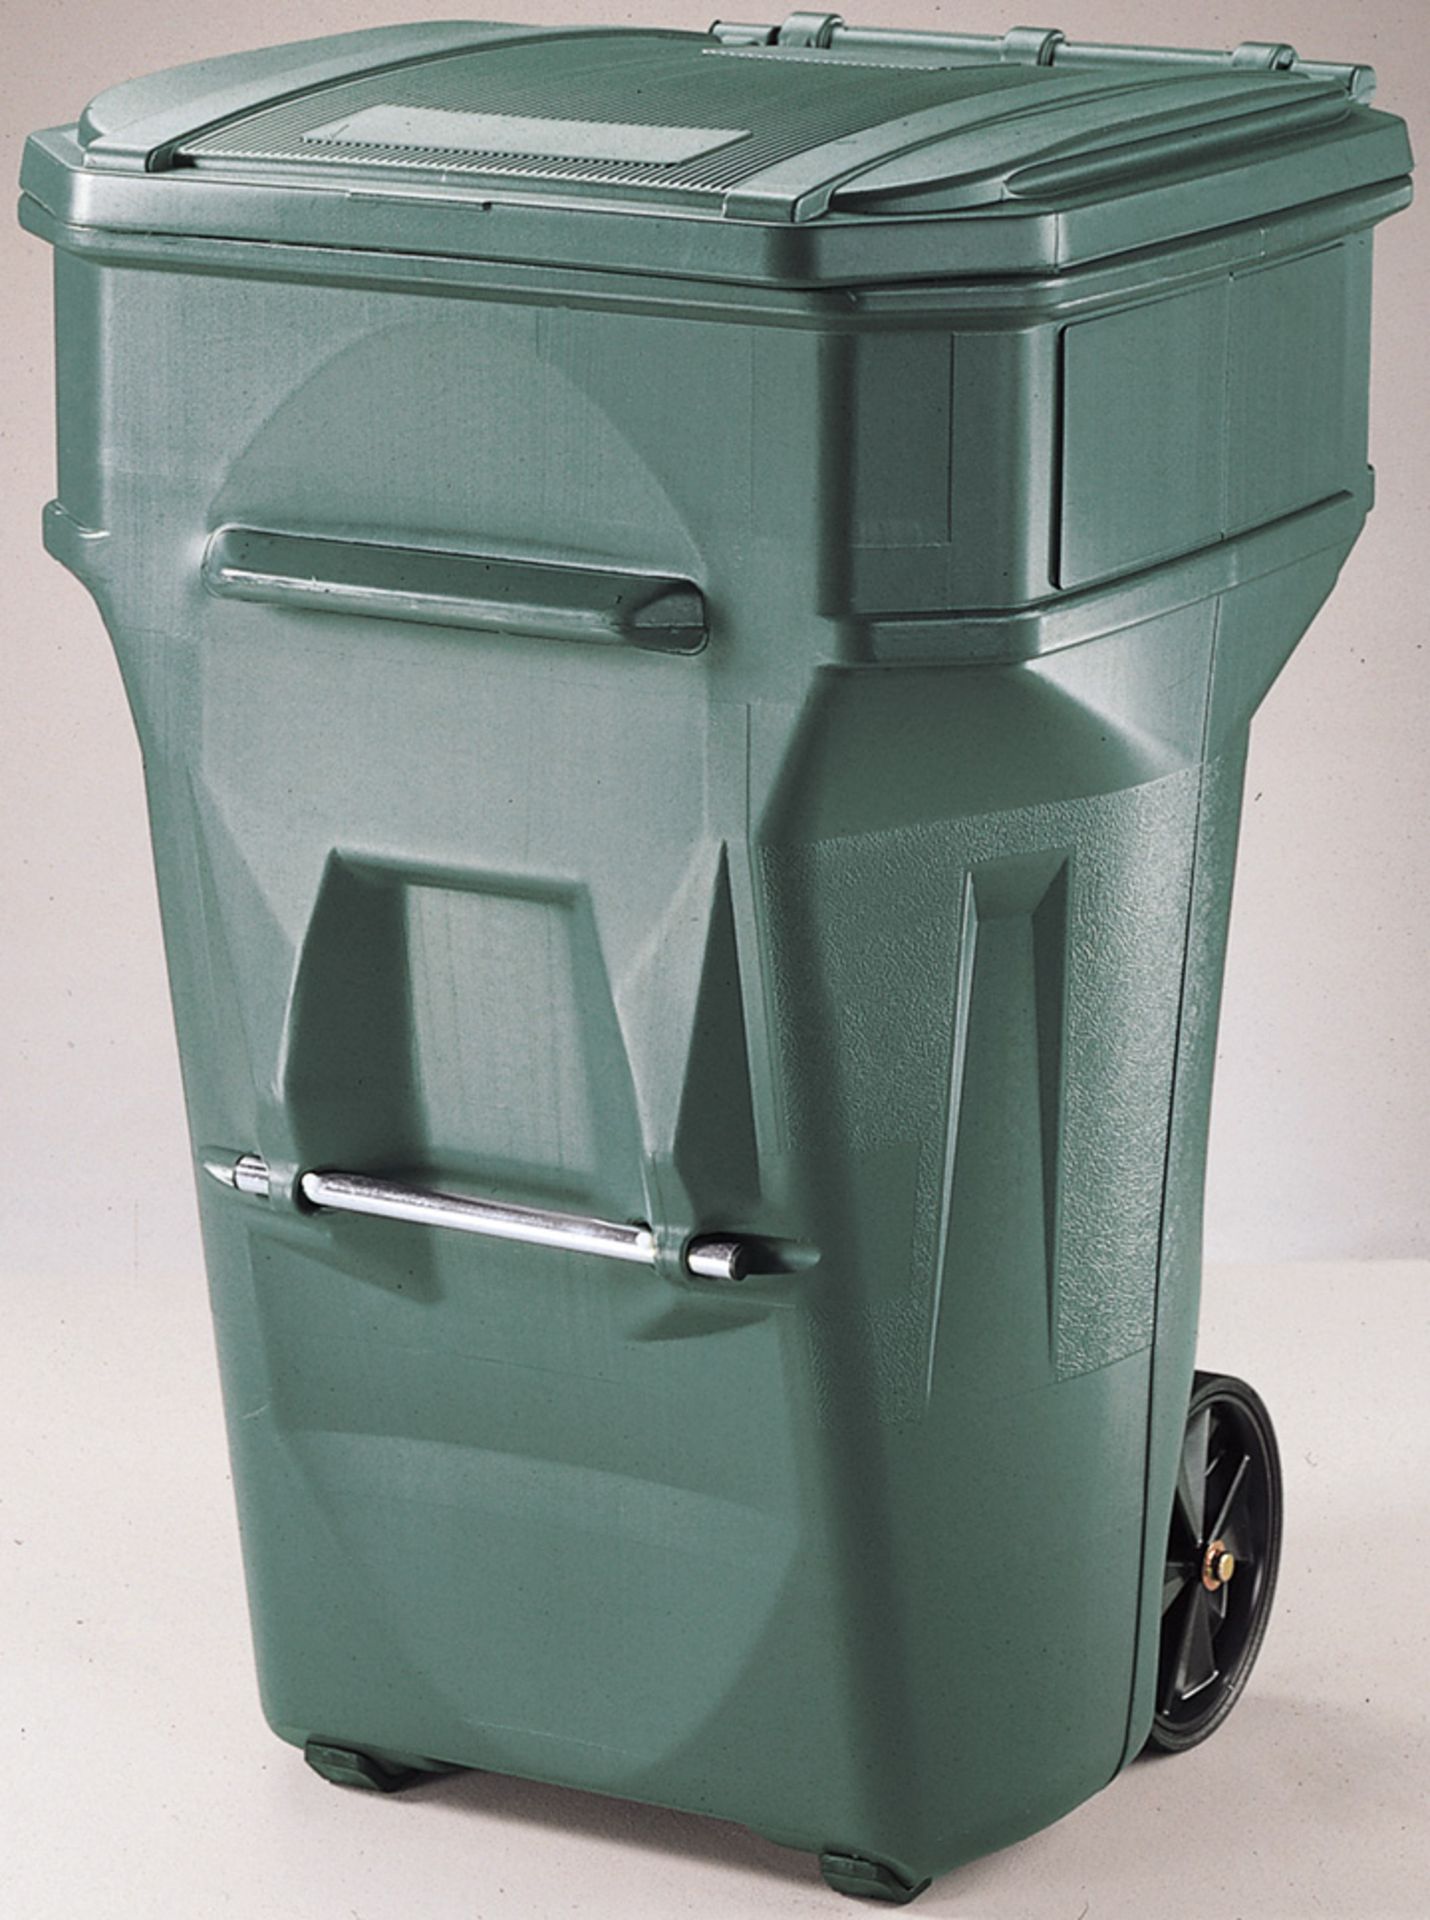 Universal Waste Cart Business - A blow molded, universal waste cart design has been developed to